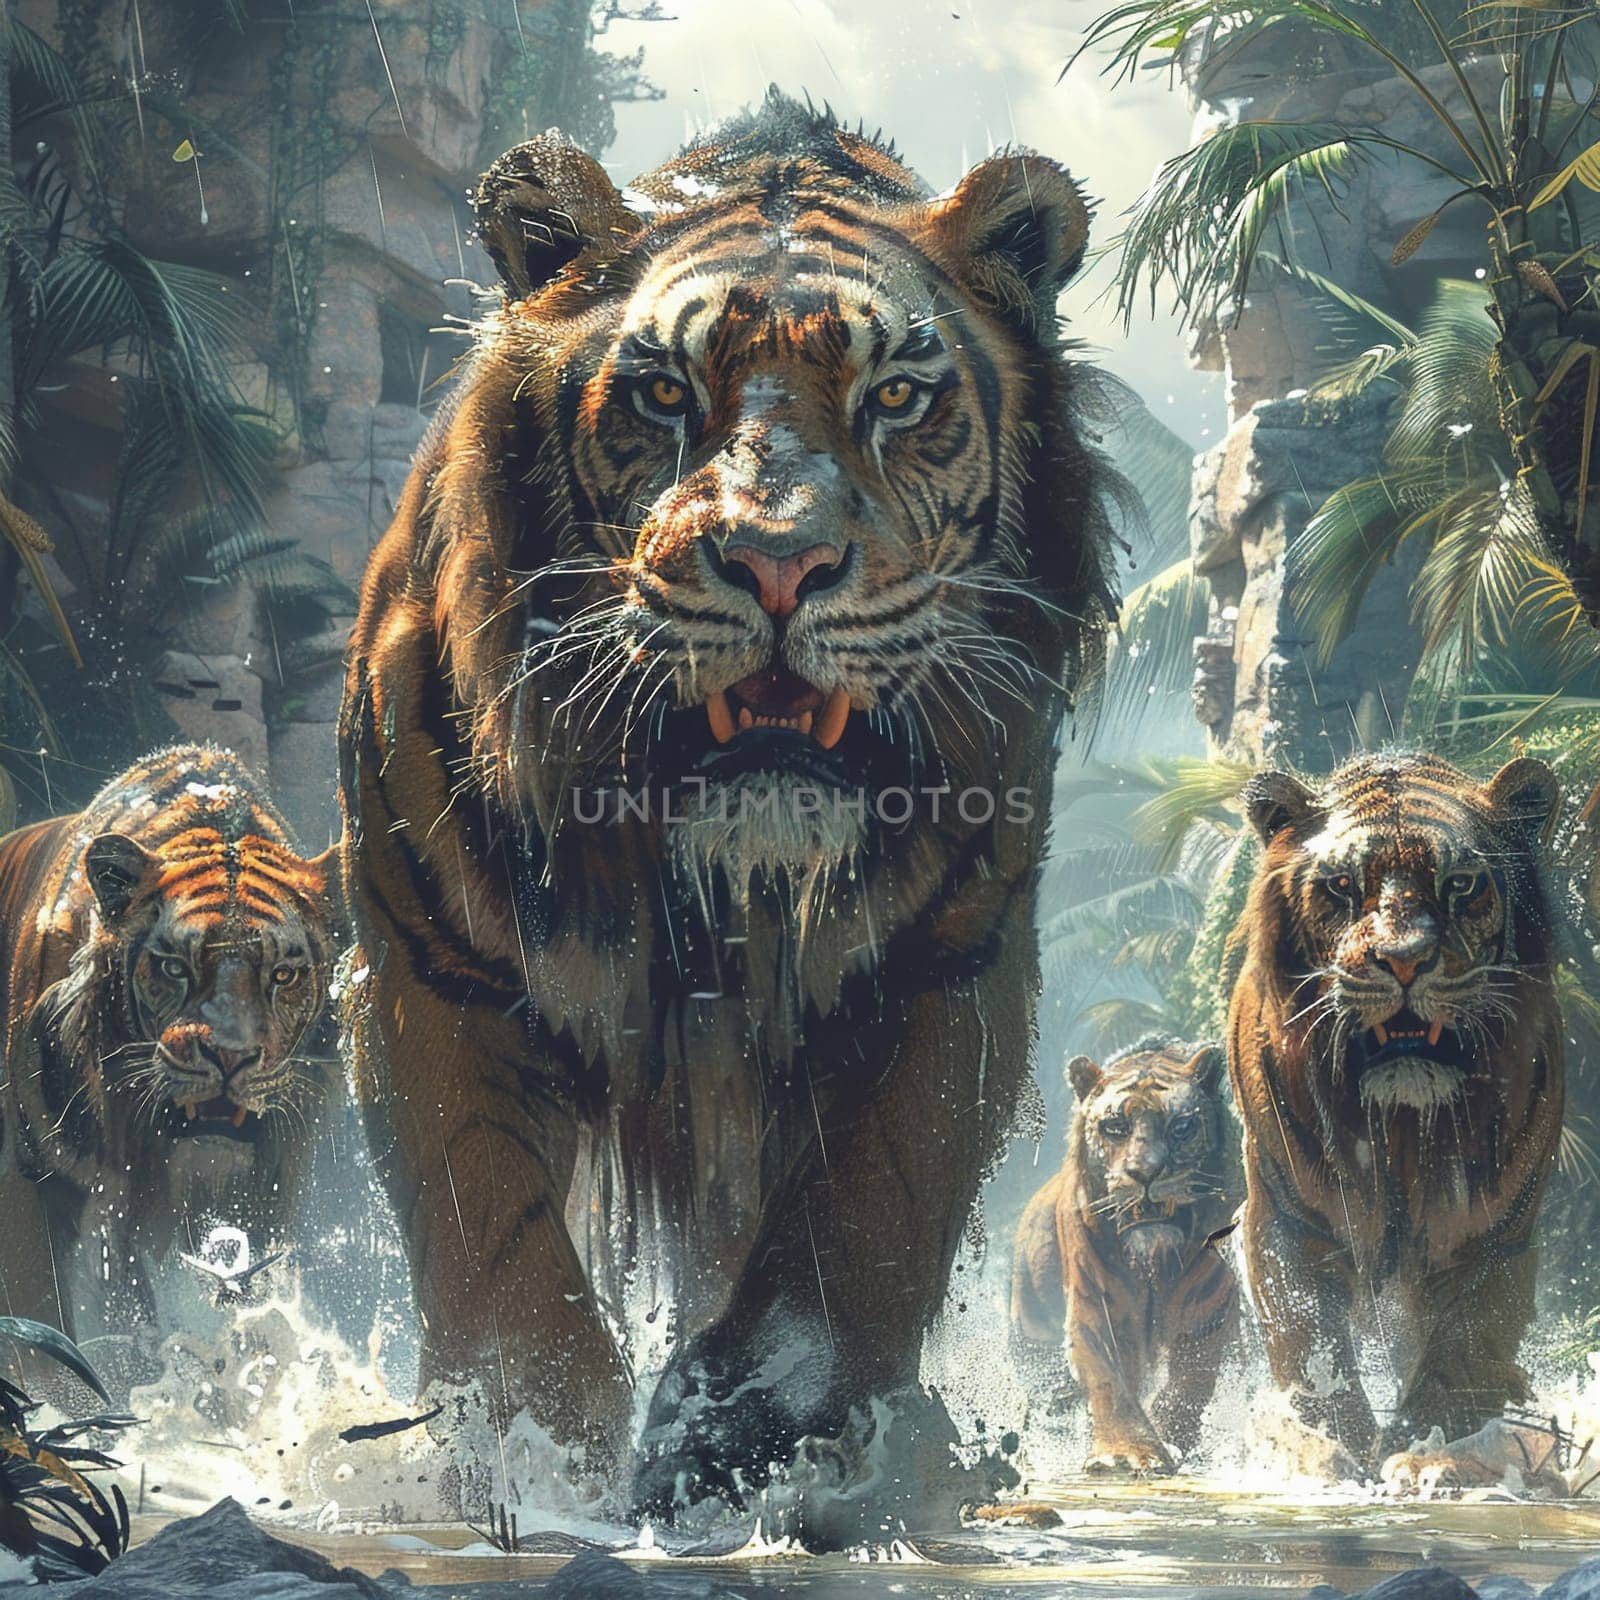 Concept art for video game where players protect endangered species on World Wildlife Day.